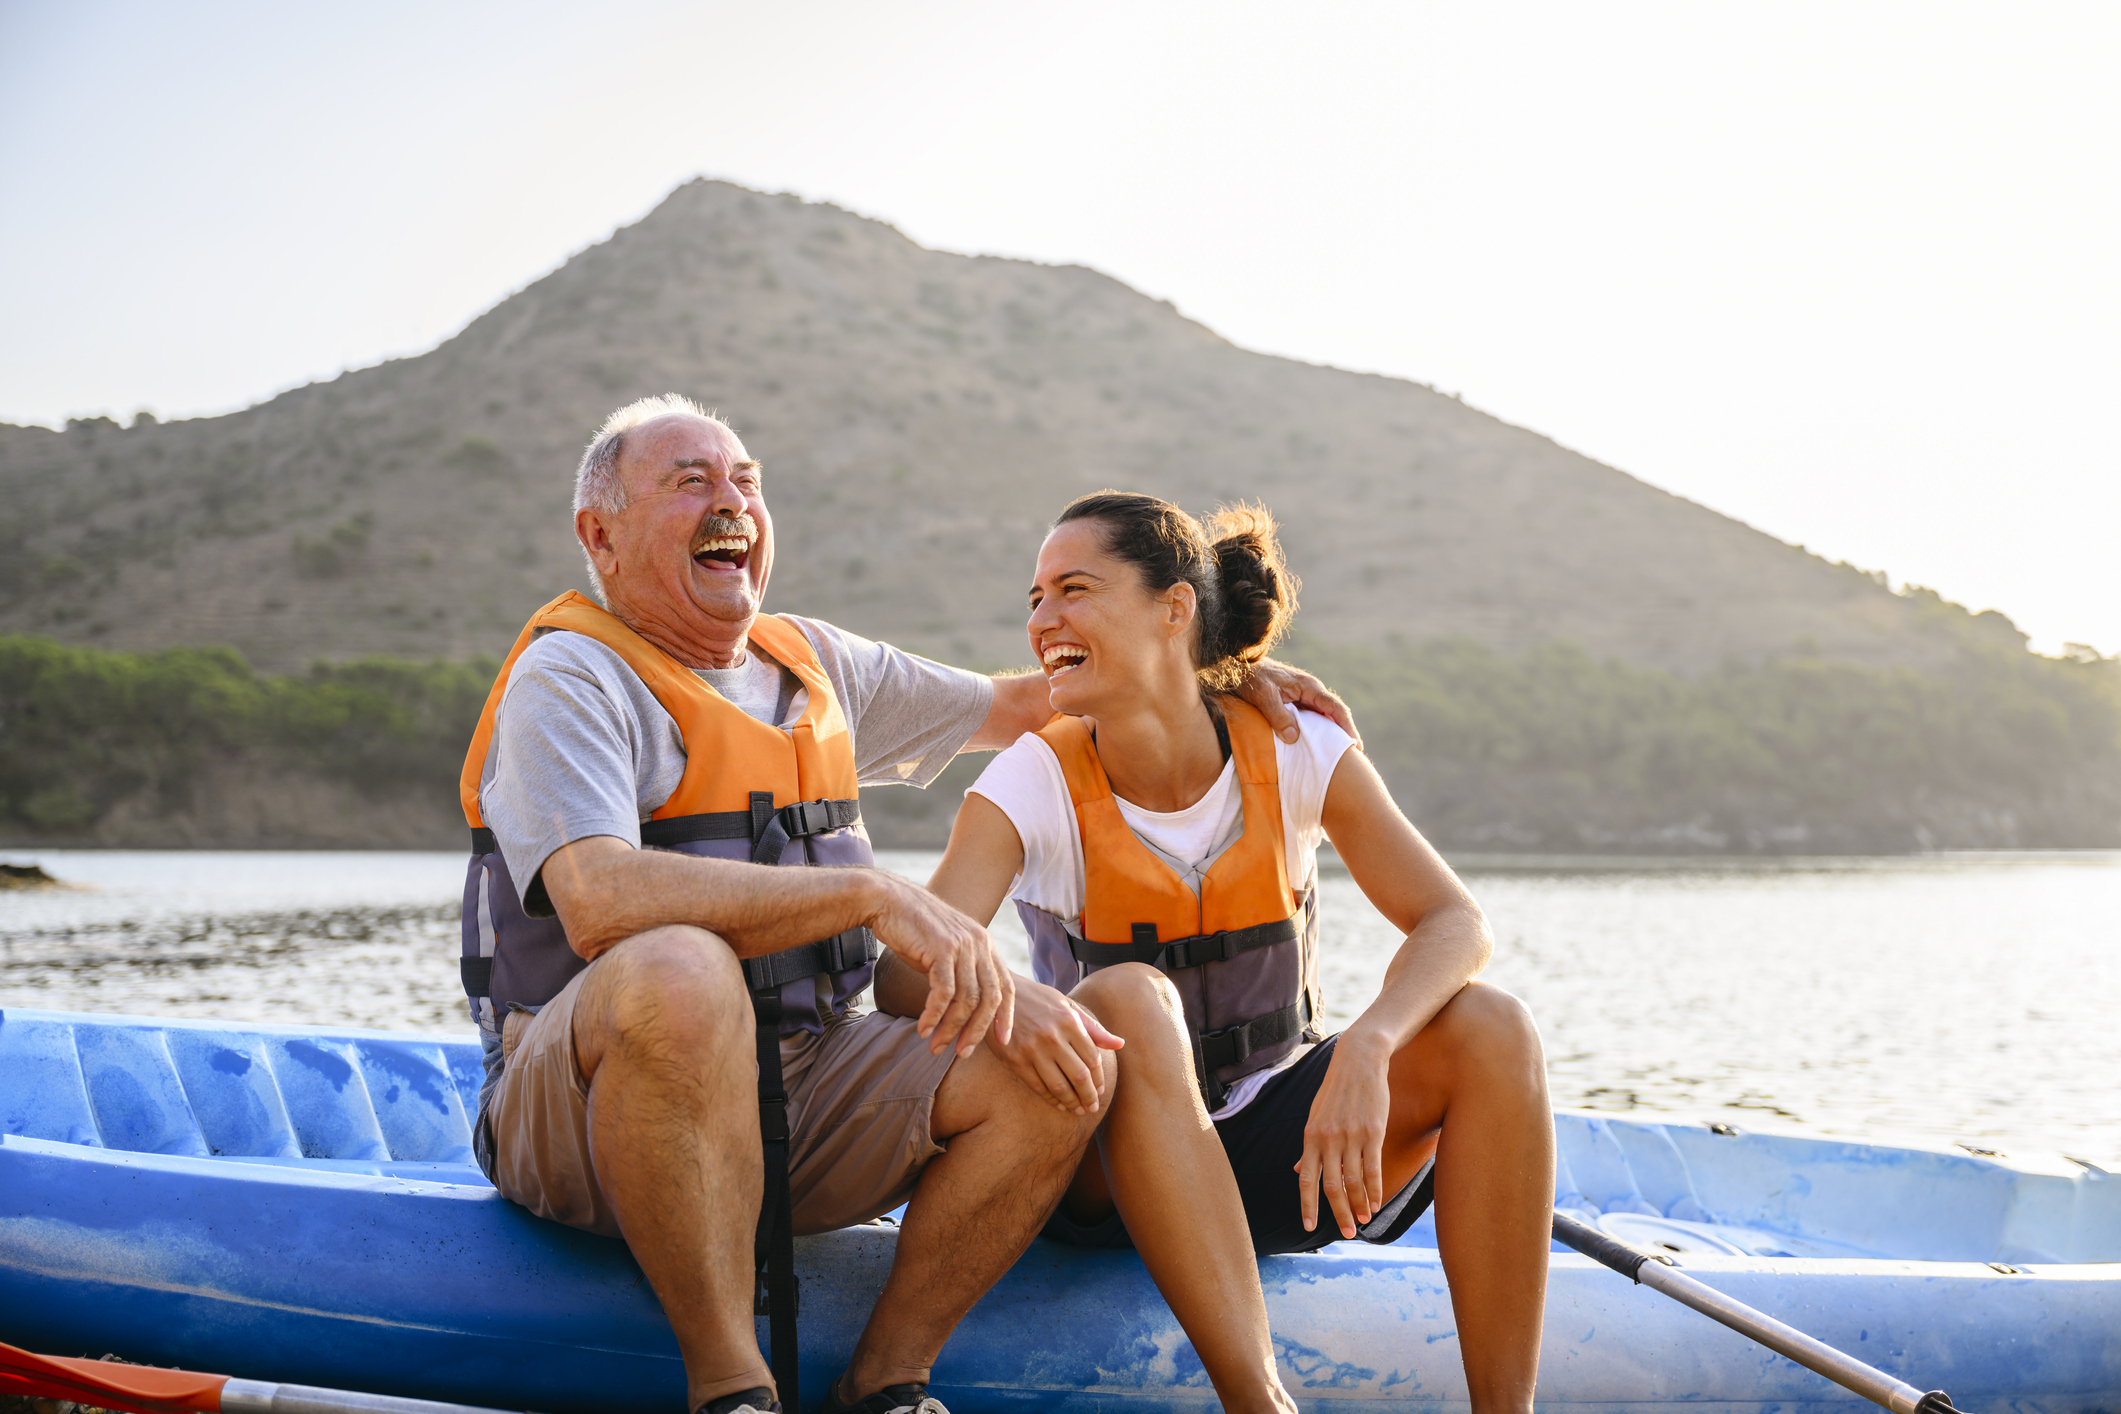 An older man and young woman with safety vests smiling and laughing while sitting on a blue kayak